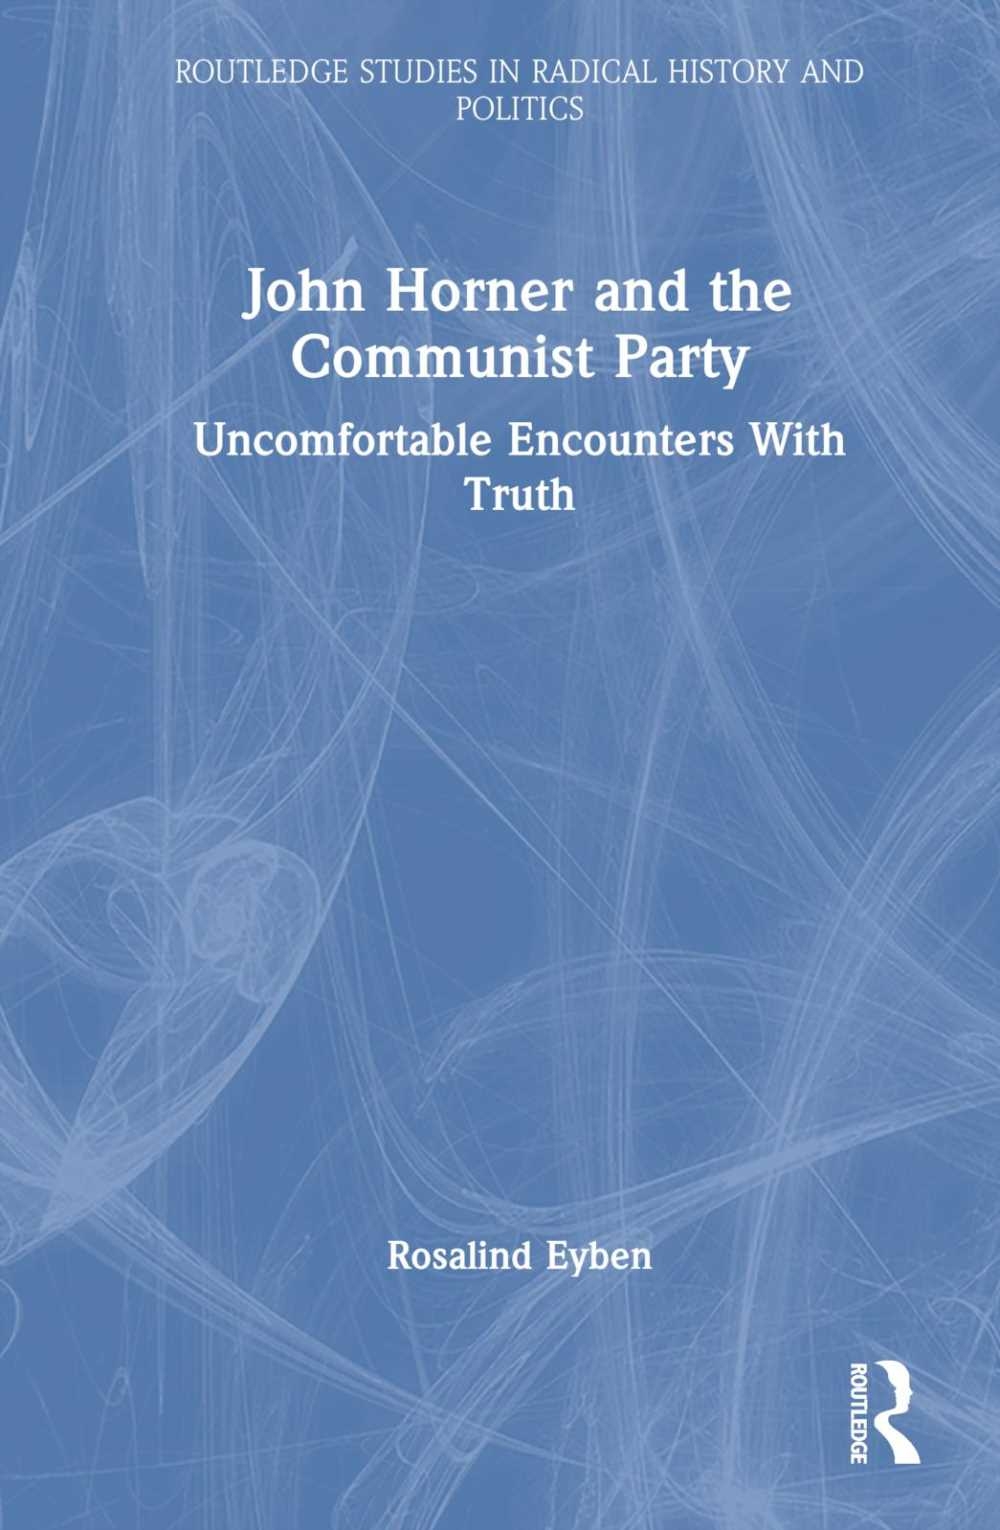 John Horner and the Communist Party: Uncomfortable Encounters with Truth